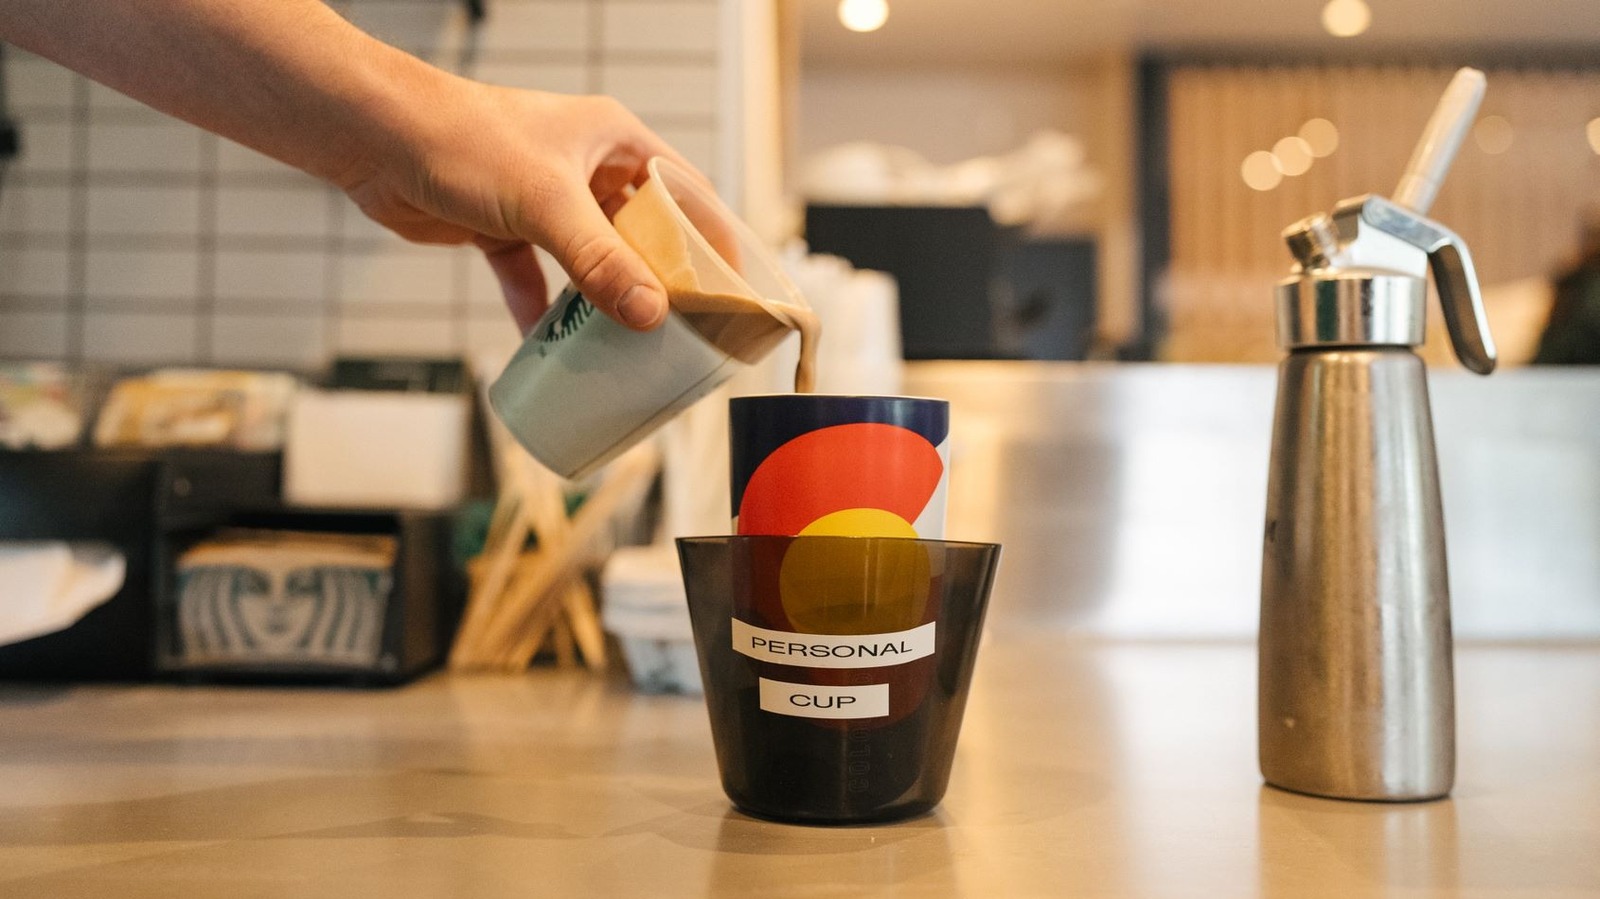 Get ready to start bringing your own cup to Starbucks